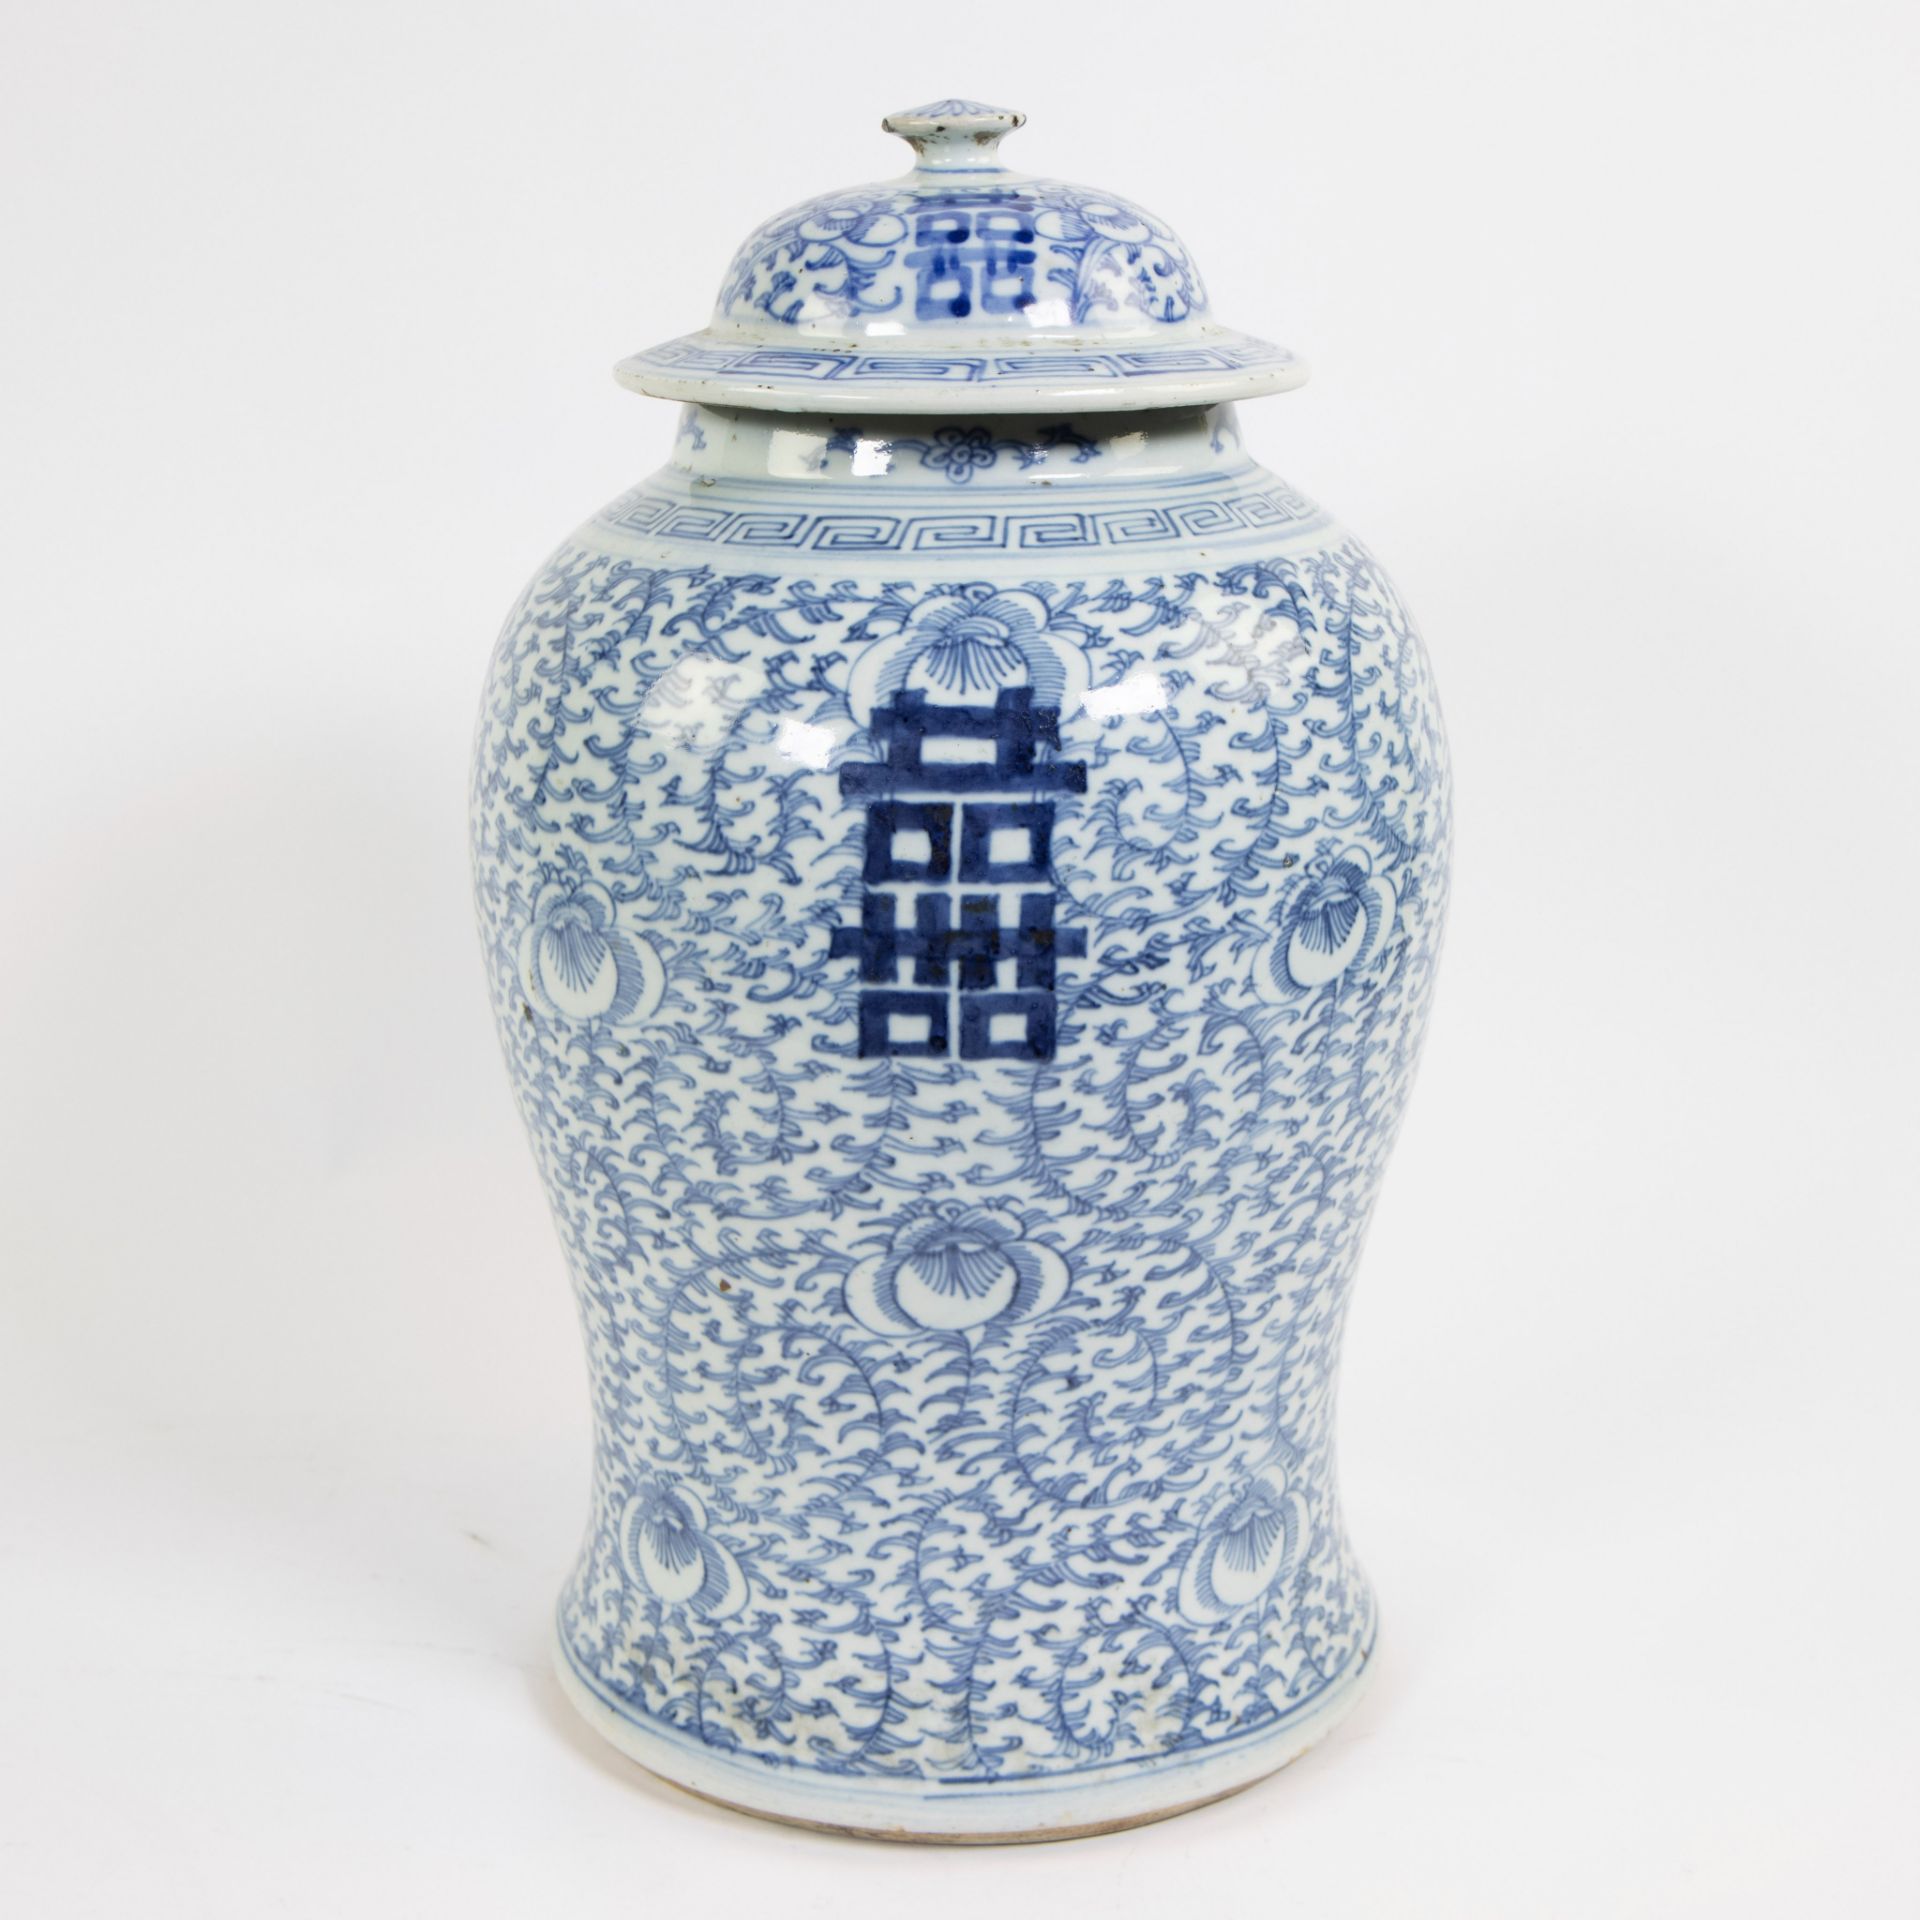 A blue and white Chinese celadon porcelain vase and cover, 19th C. - Image 3 of 8